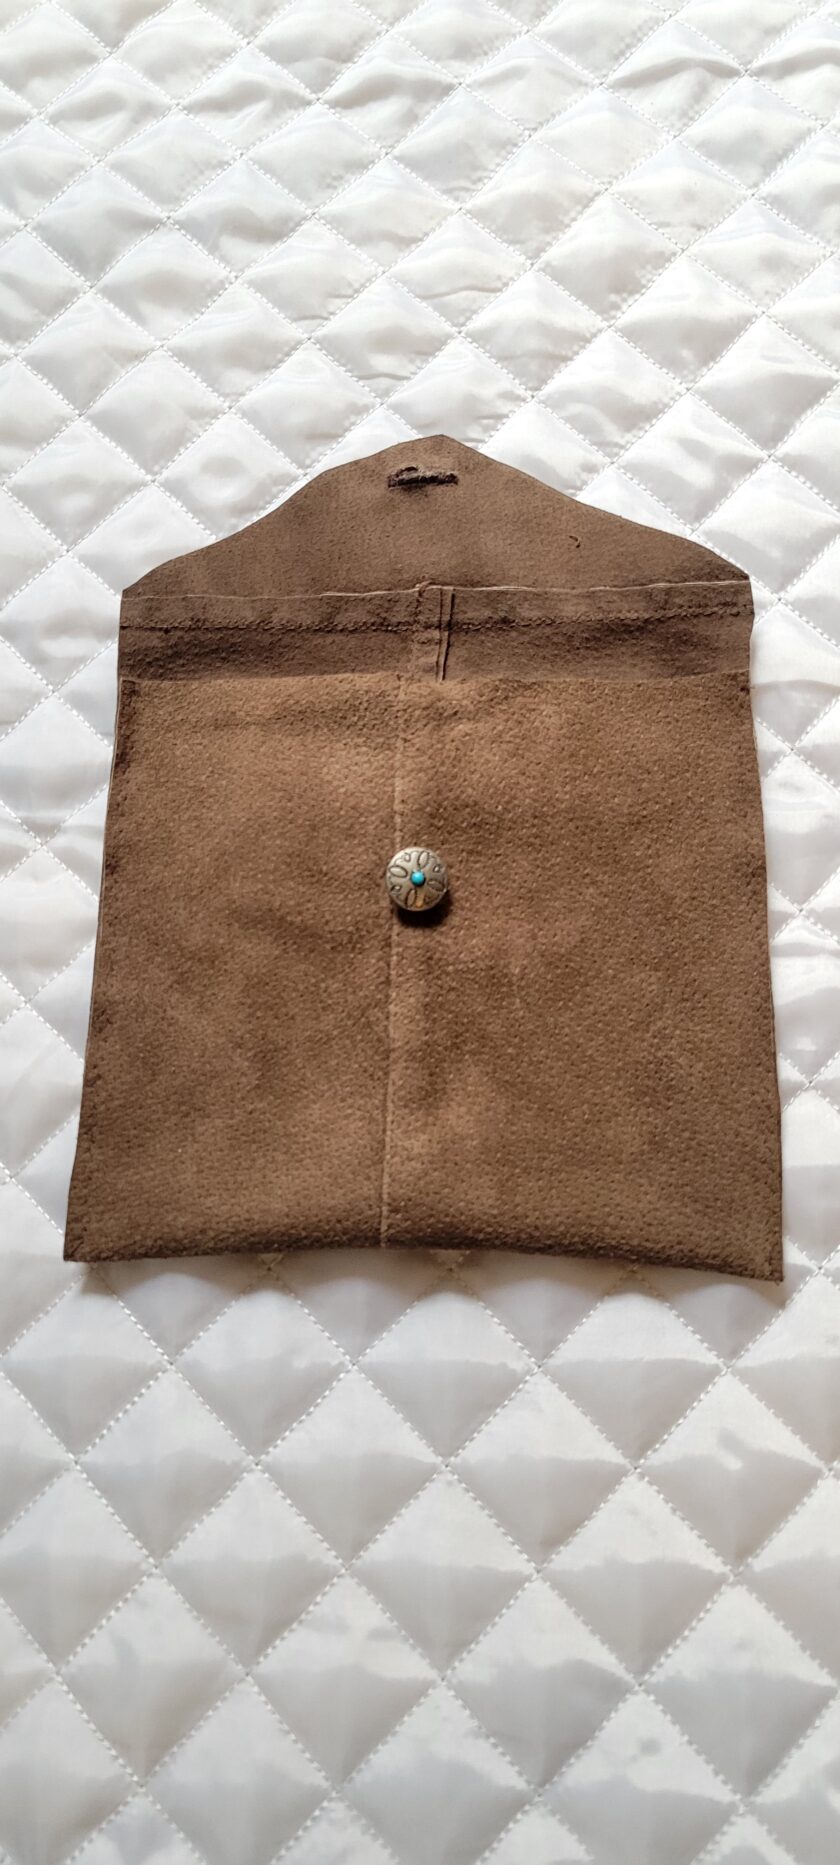 A brown bag with a button on it.